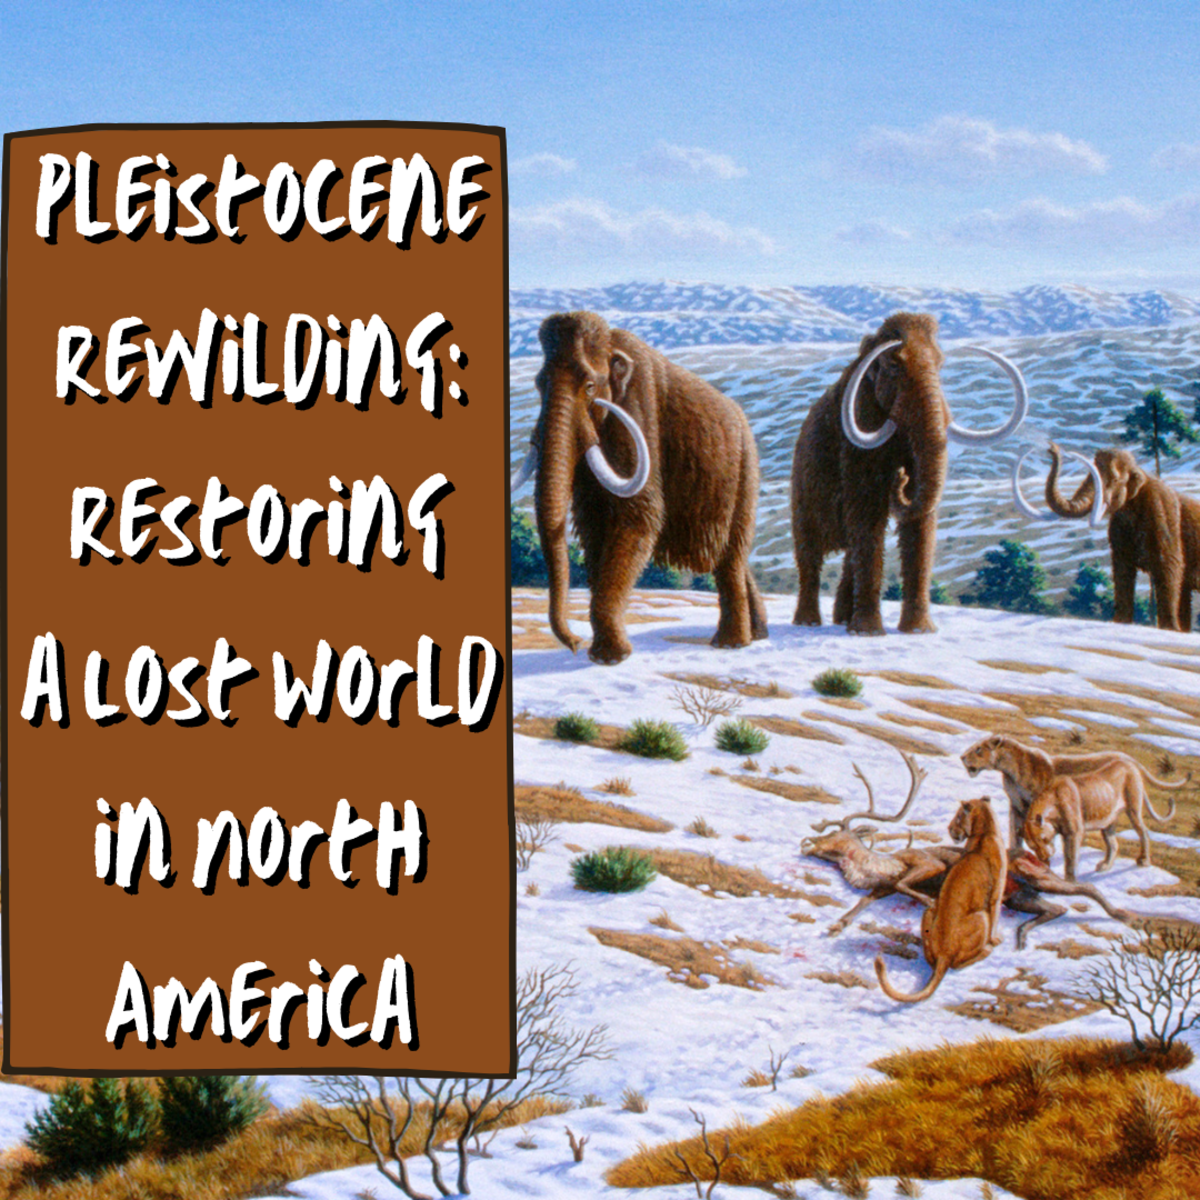 Read on to learn about the Pleistocene rewilding of North America. Will the African lion or Siberian tiger roam the United States someday? You'll also learning about Pleistocene rewilding pros and cons.